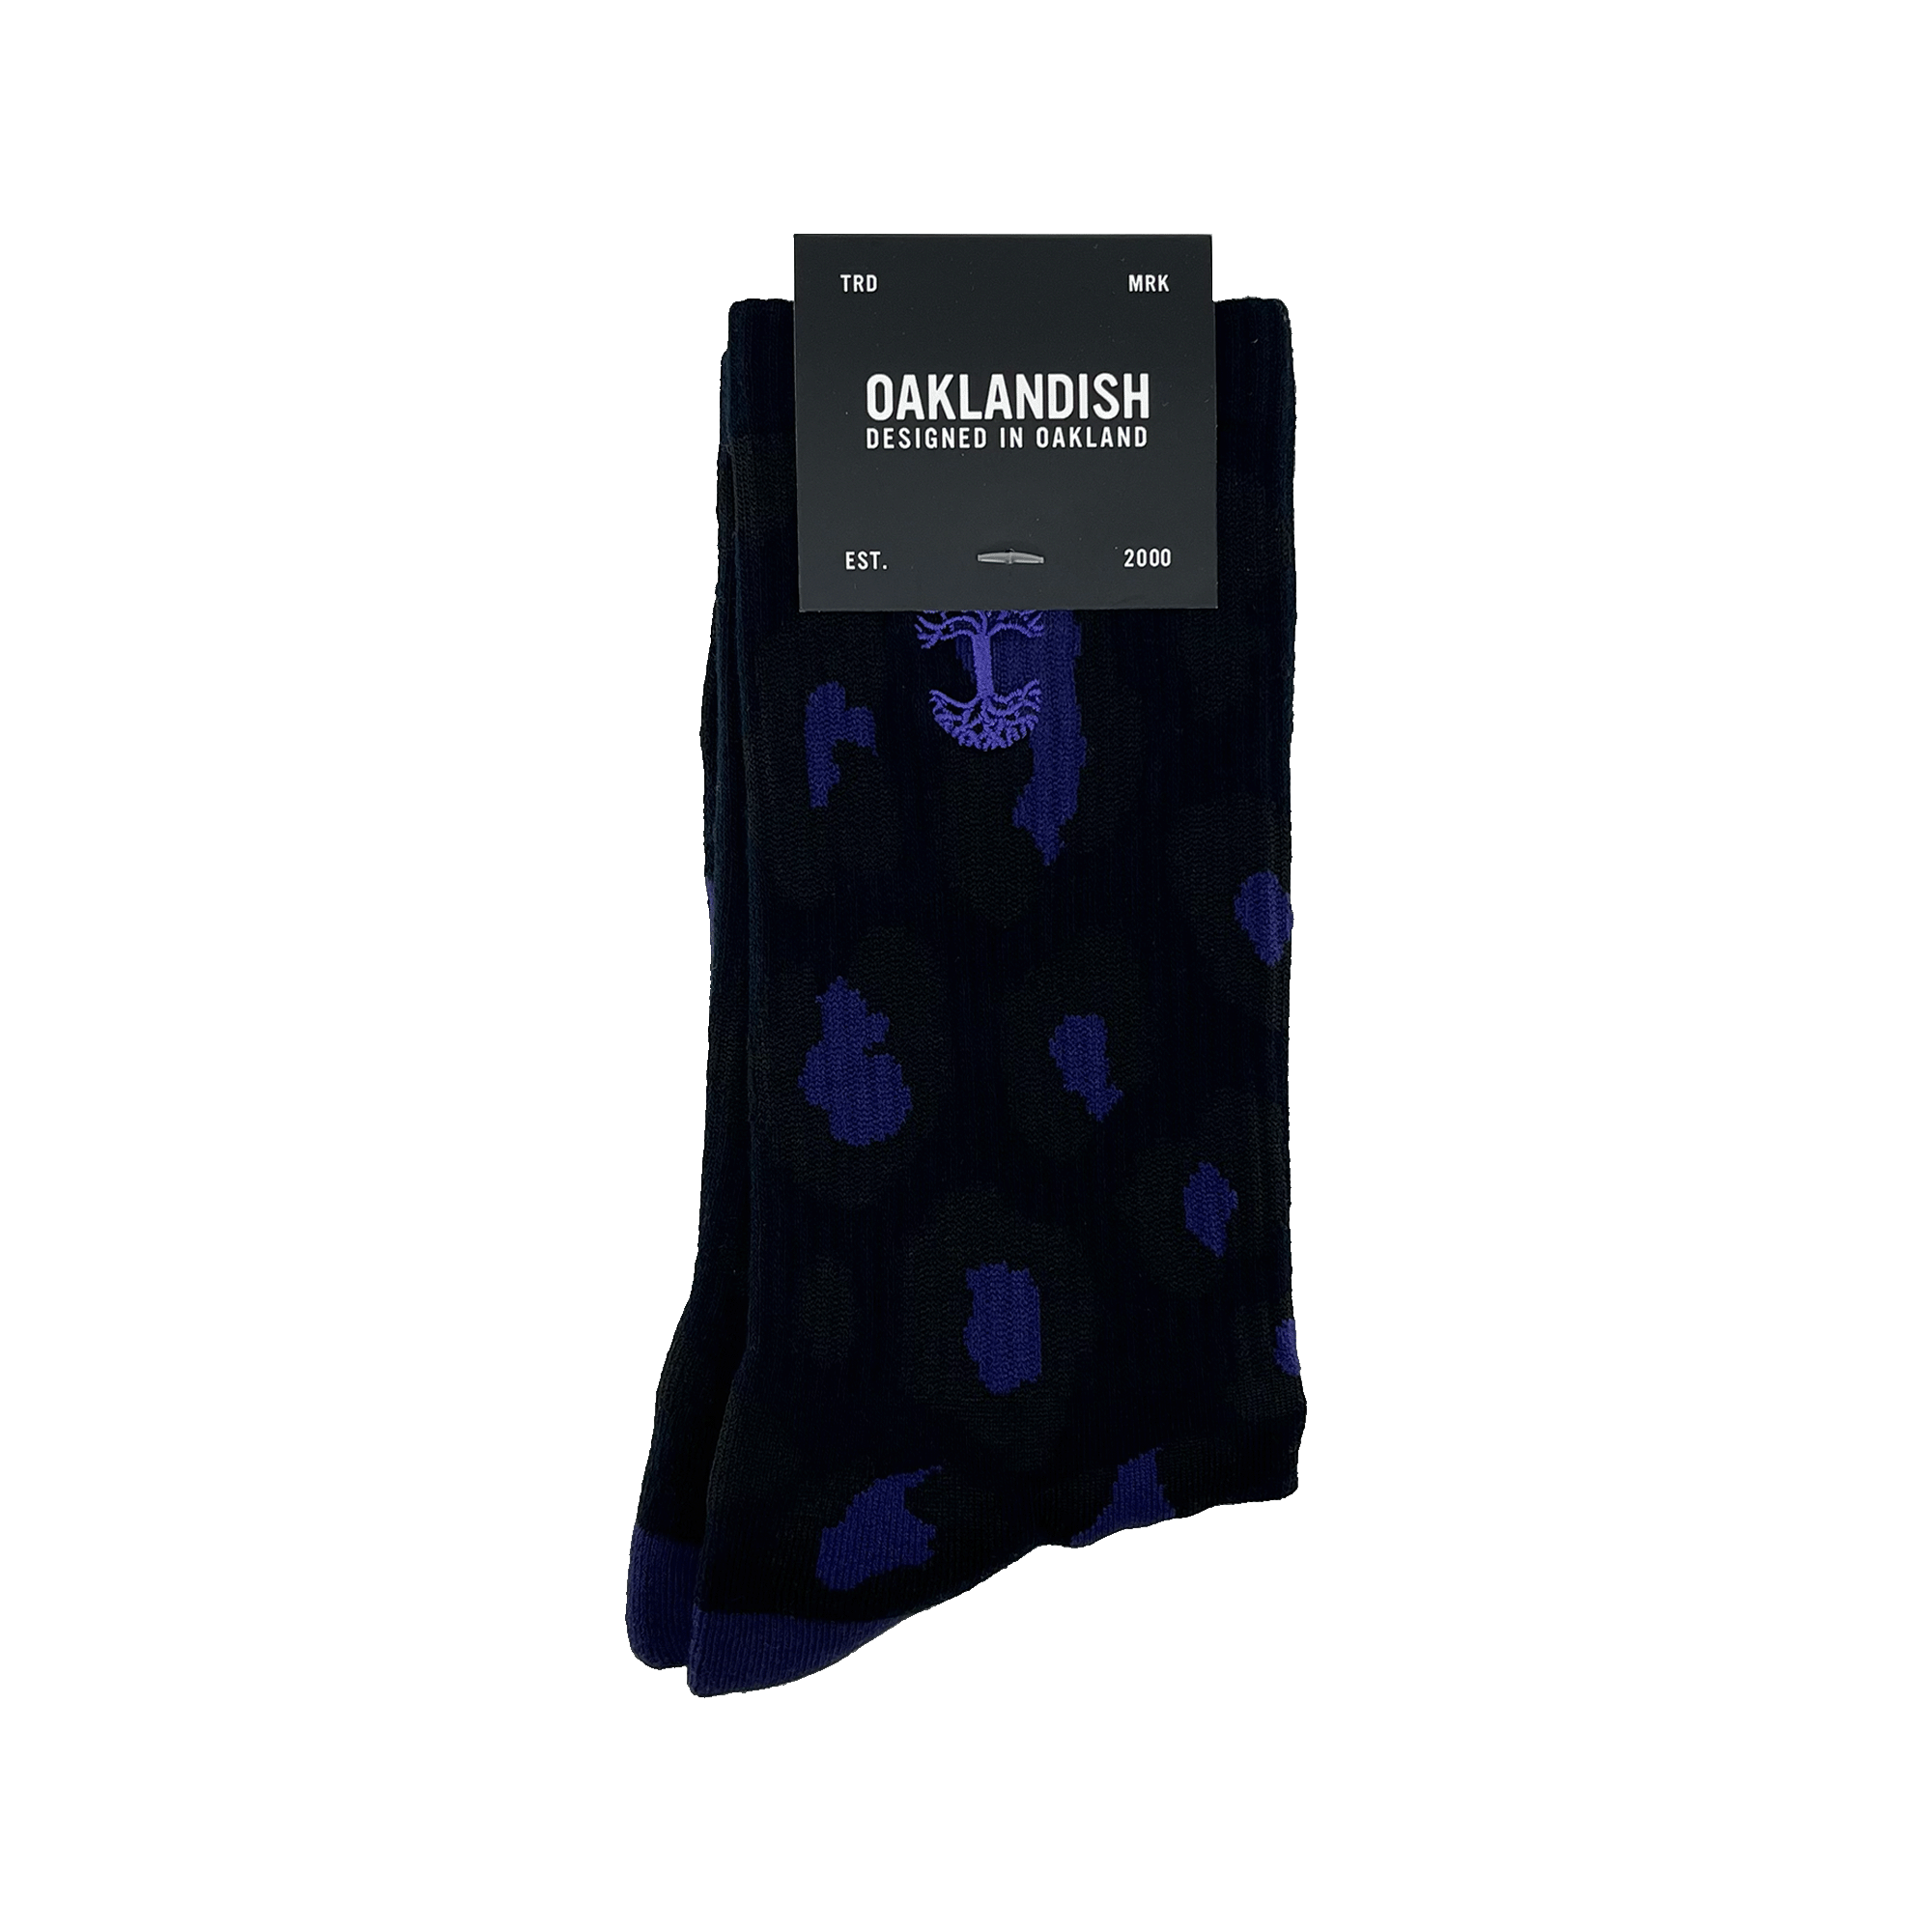 Pair folded black and blue crew socks in Oaklandish packaging with an embroidered blue Oaklandish tree logo on the side.